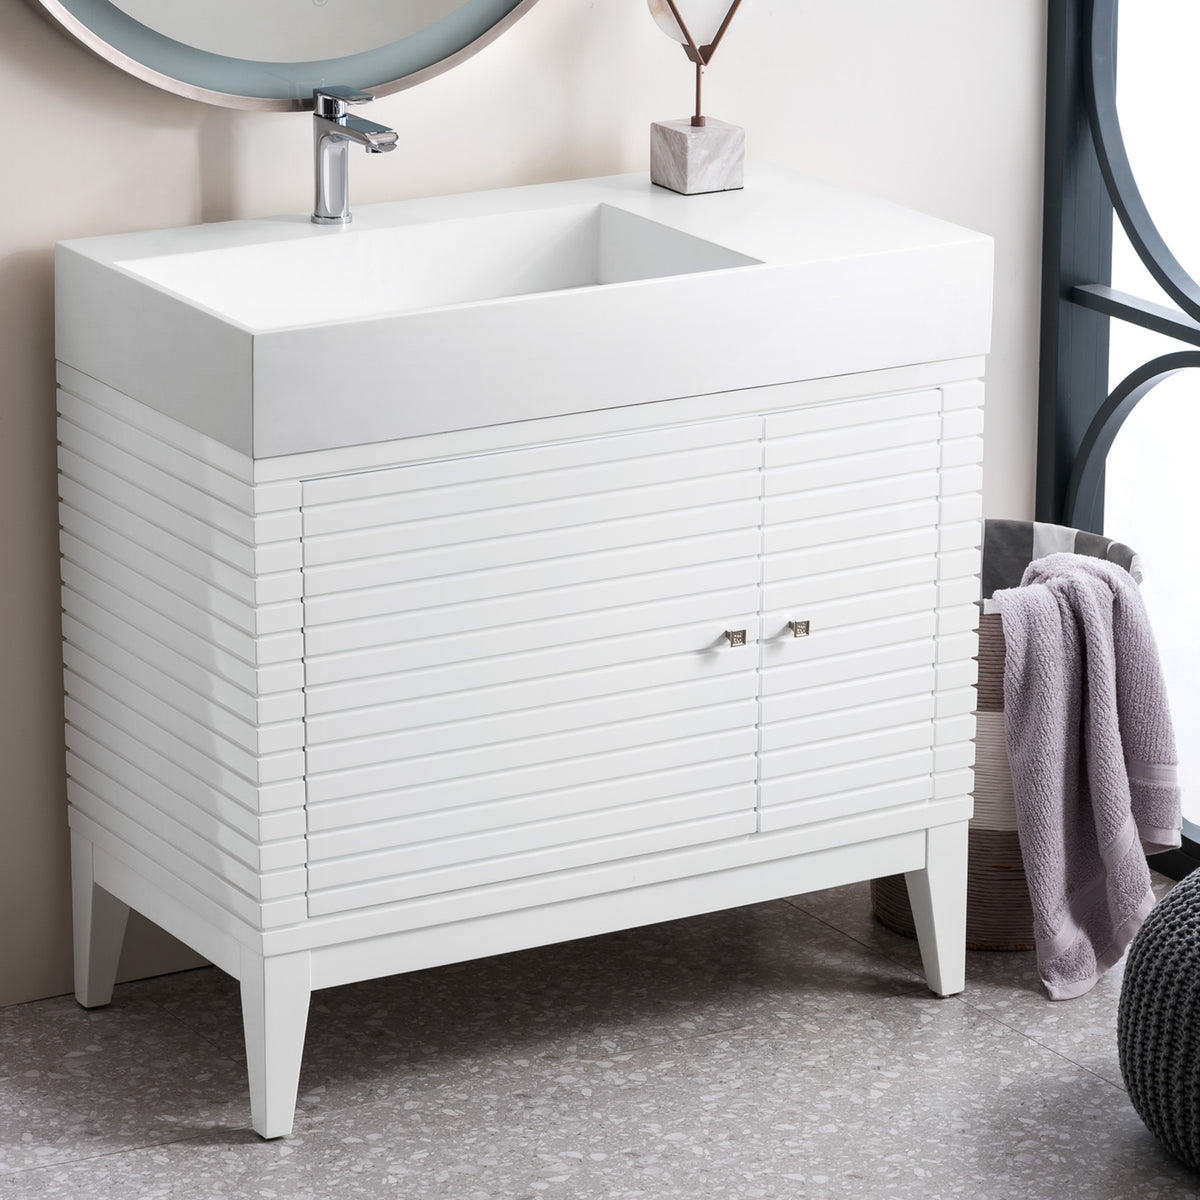 36" Linear Single Bathroom Vanity, Glossy White with Glossy White Composite Top